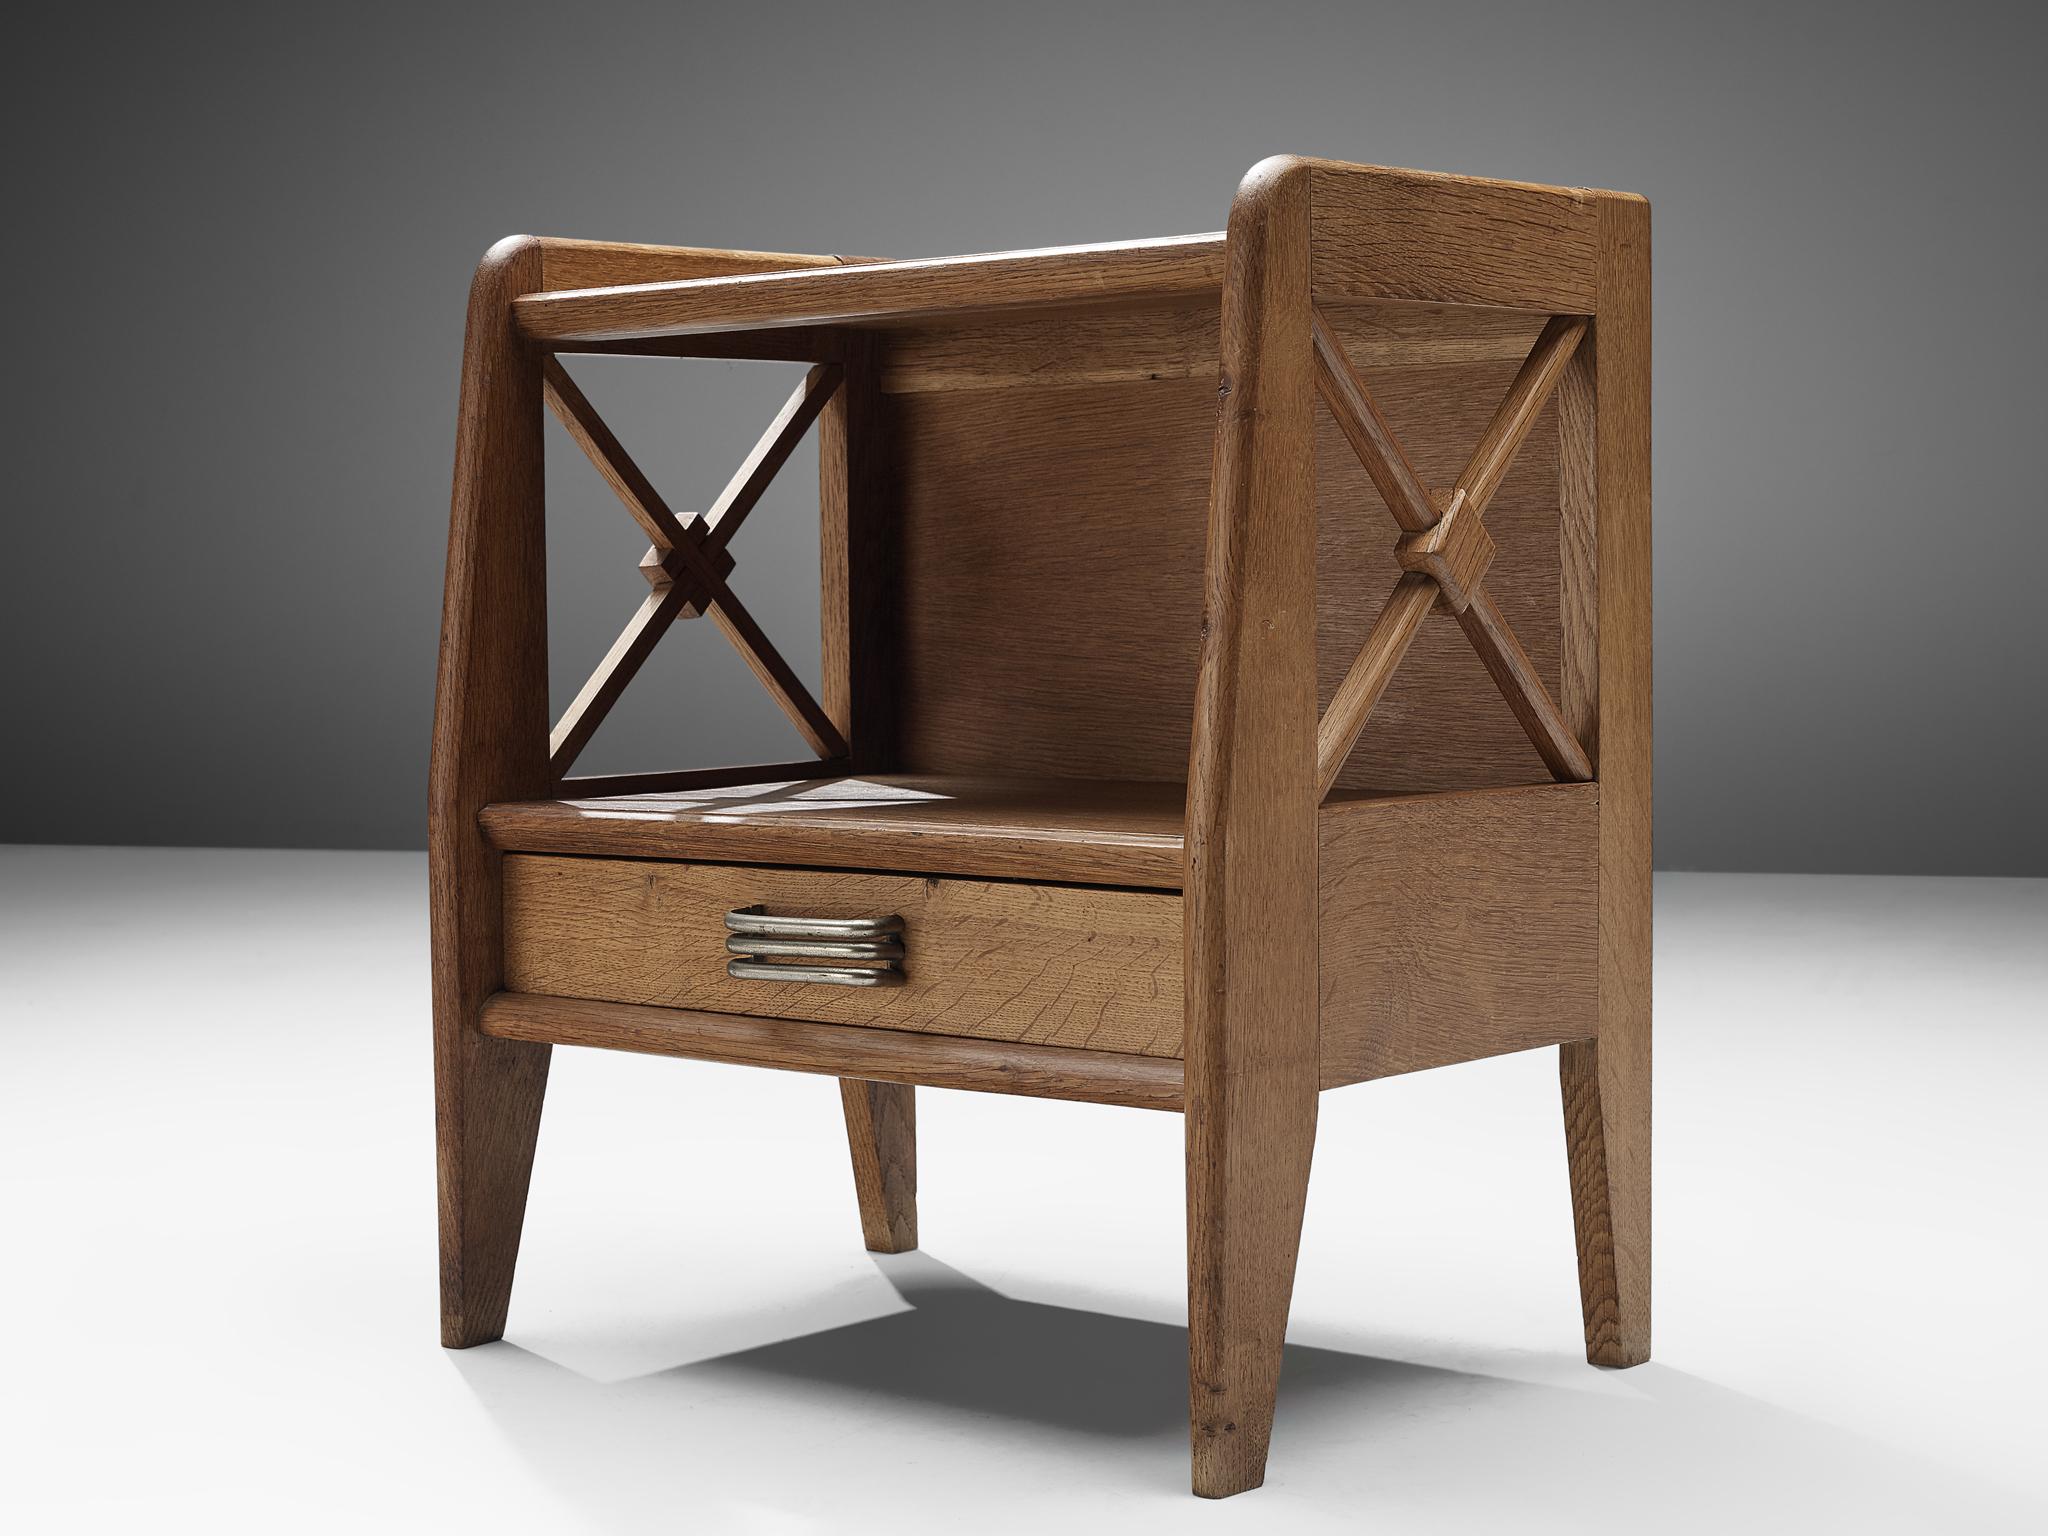 Nightstand, oak and brass, France, 1960s.

Elegant night stand in oak that feature geometric details on the sides. The nightstand is lifted from the ground by slim, conical legs that, together with the open character of the body, gives it a more